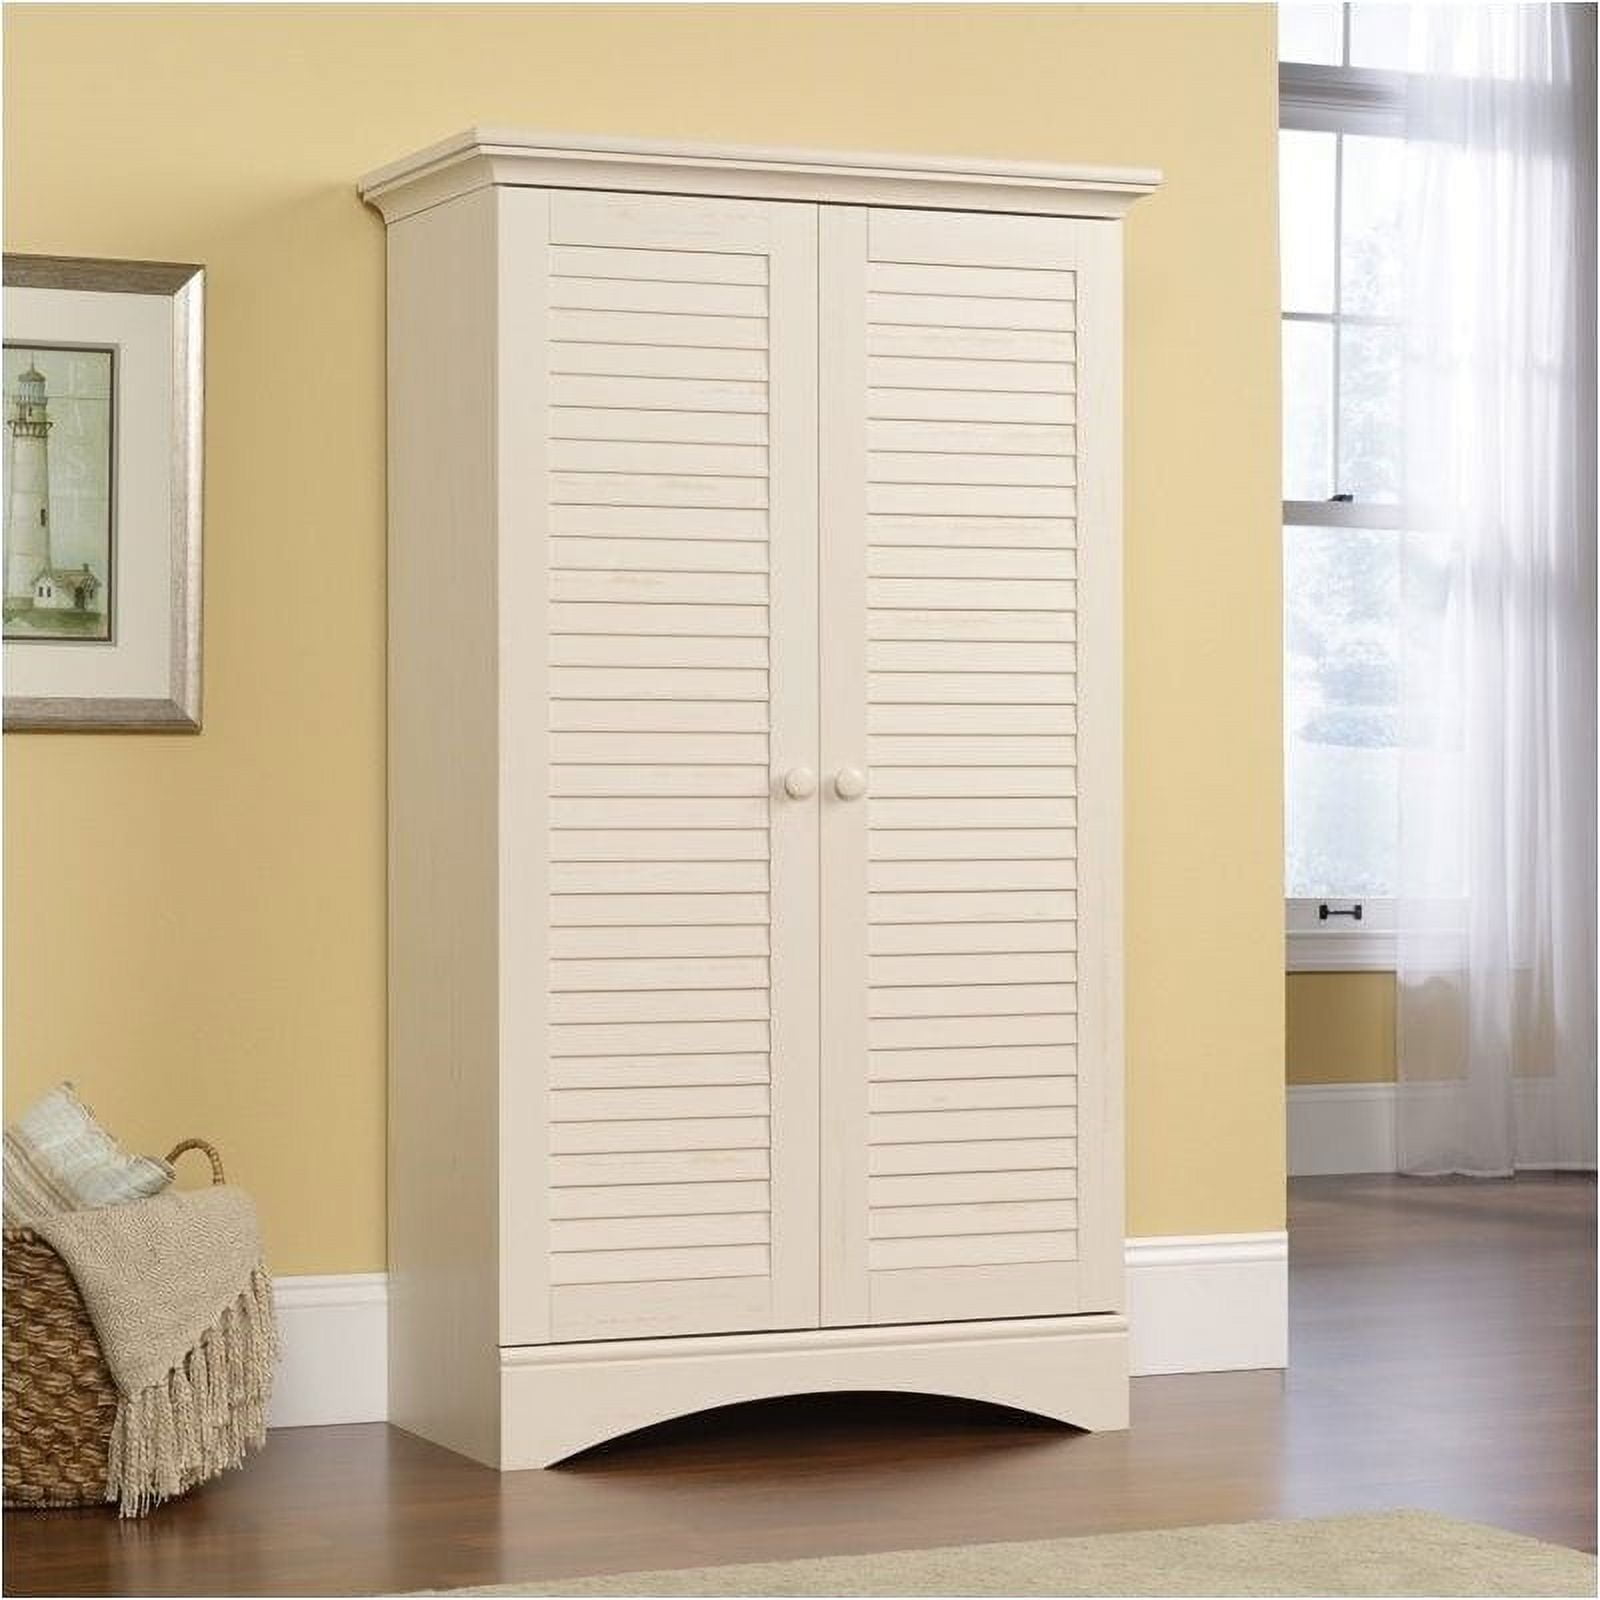 Single Row Cabinet with Drawers